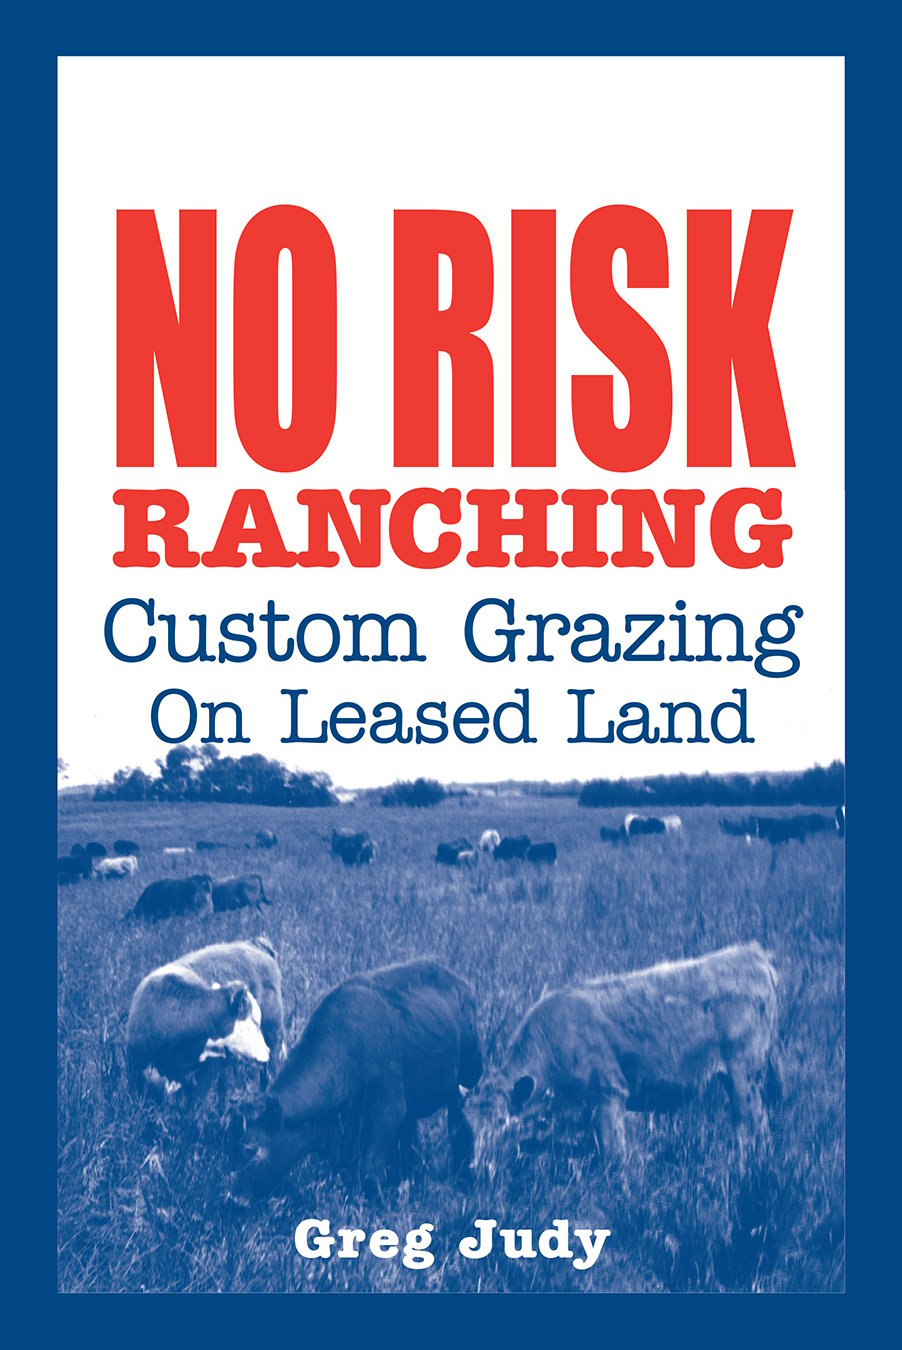 The No Risk Ranching cover